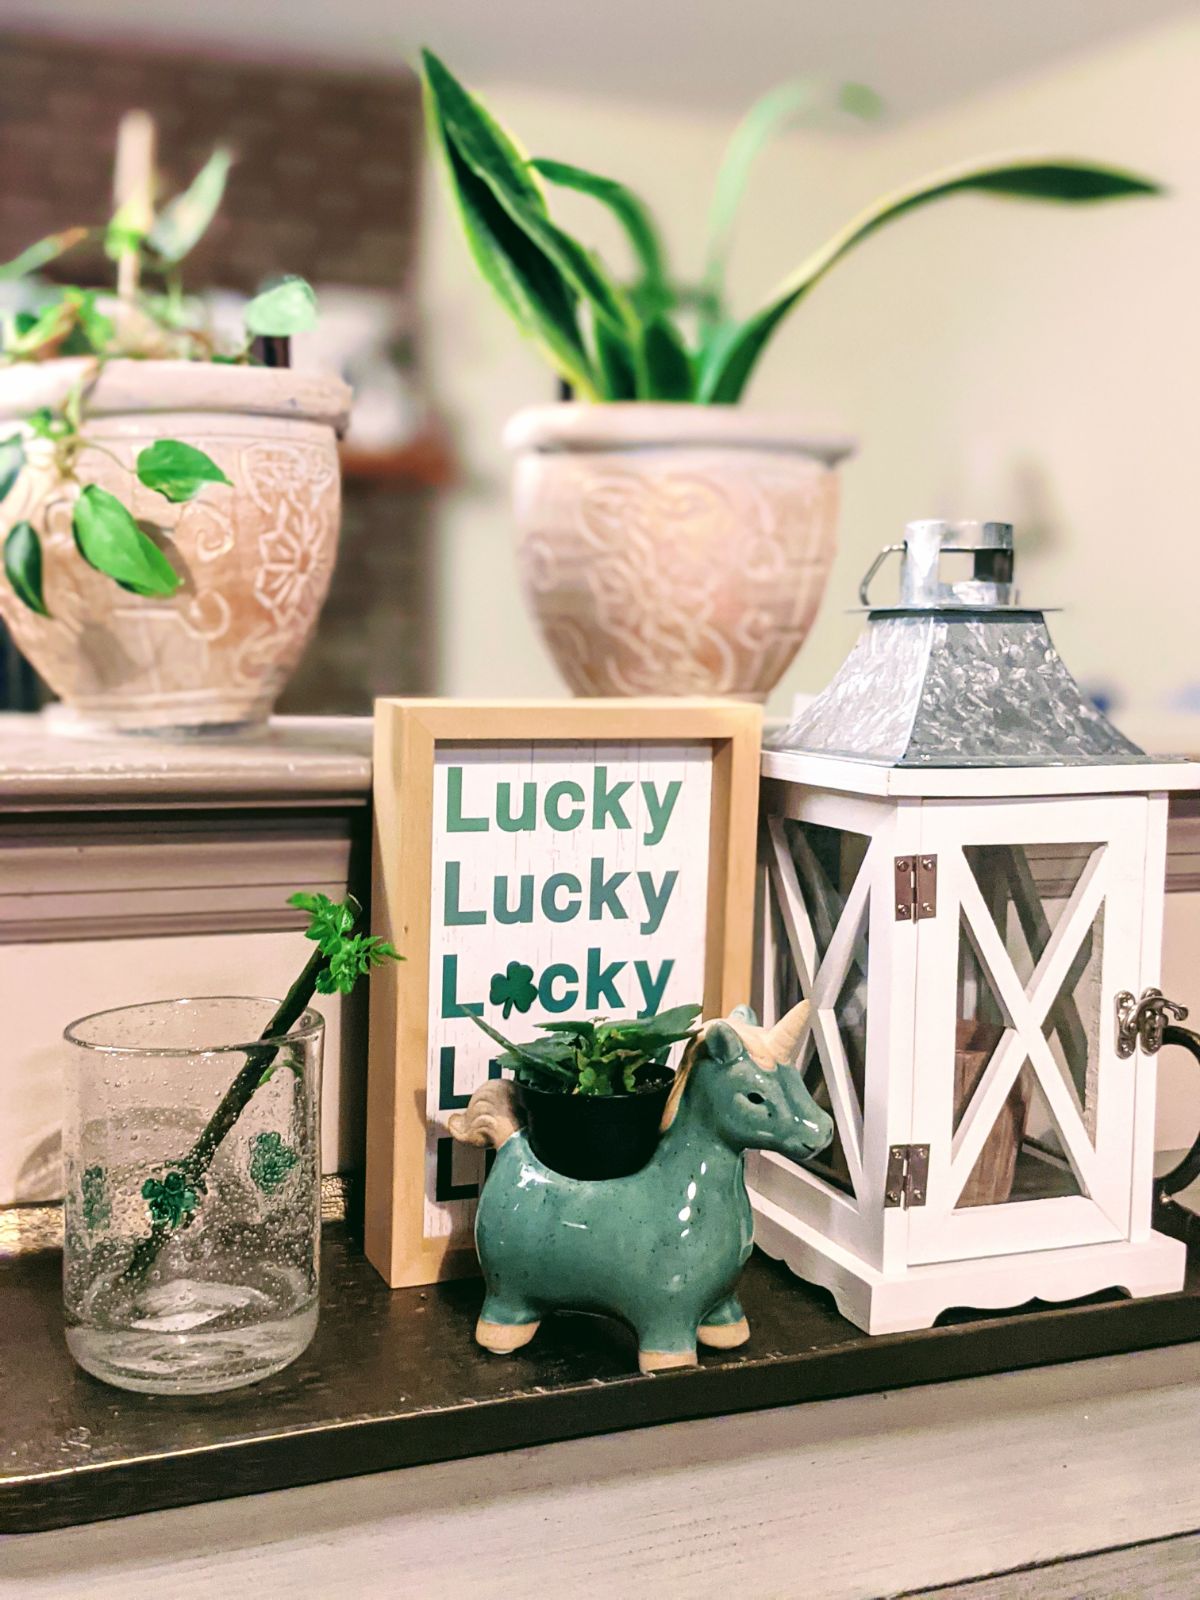 St. Patricks Day decorations indoors, featuring a Lucky sign, shamrock vase, and a green unicorn planter 